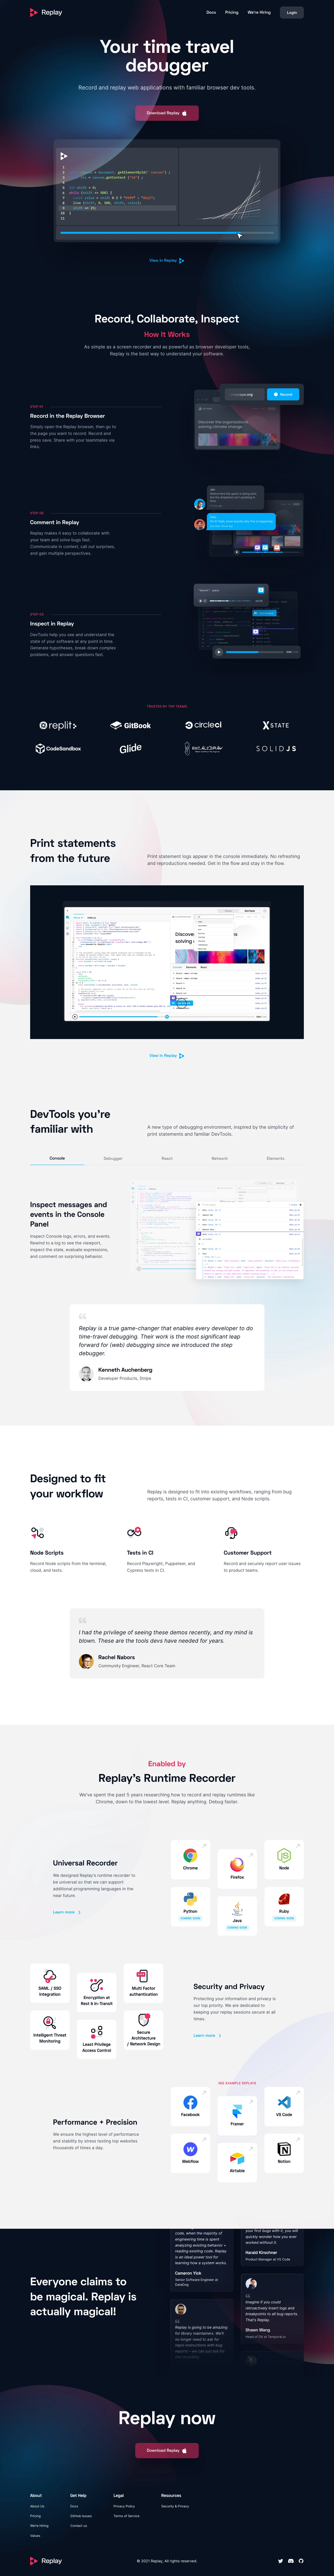 Replay Landing Page Example: Your time travel debugger. Record and replay web applications with familiar browser dev tools.